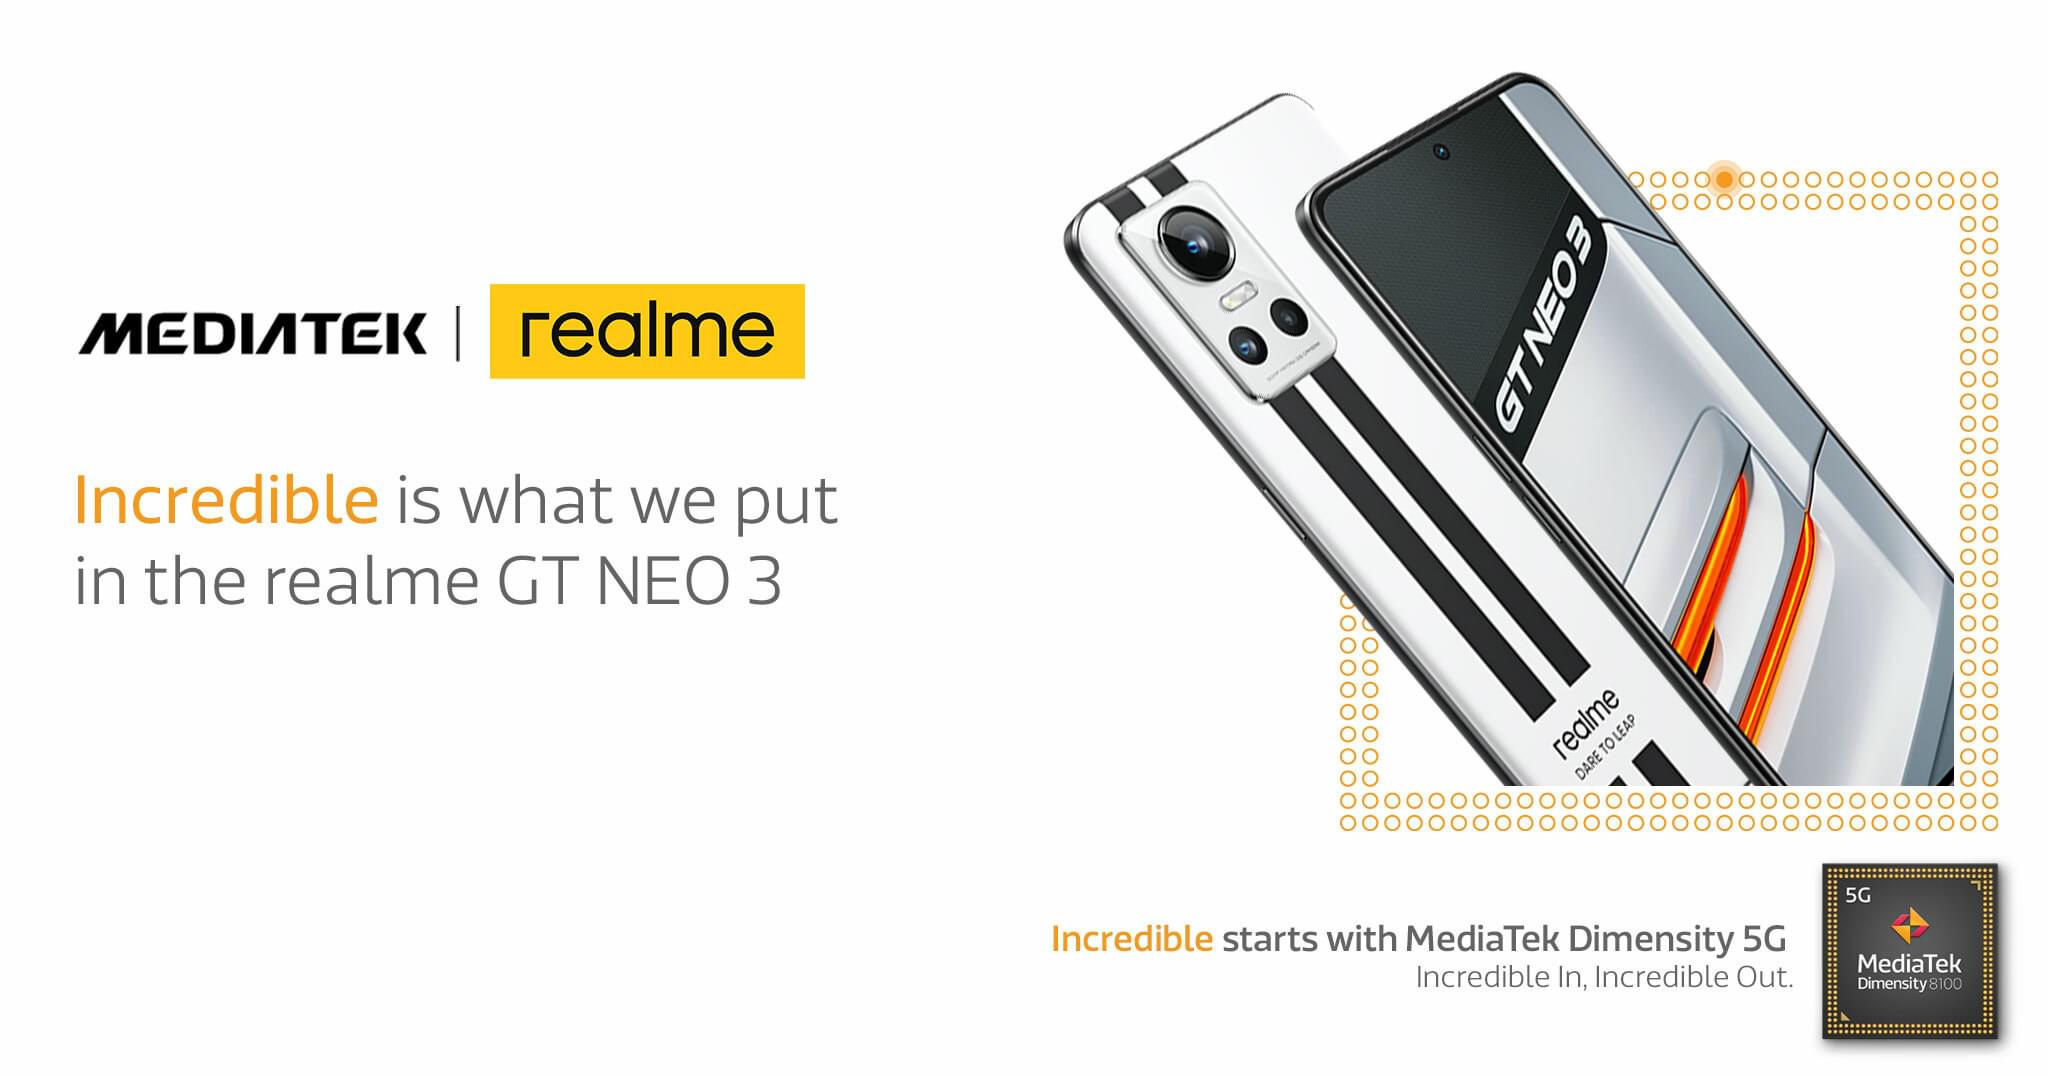 realme GT NEO 3 powered by Dimensity 8100